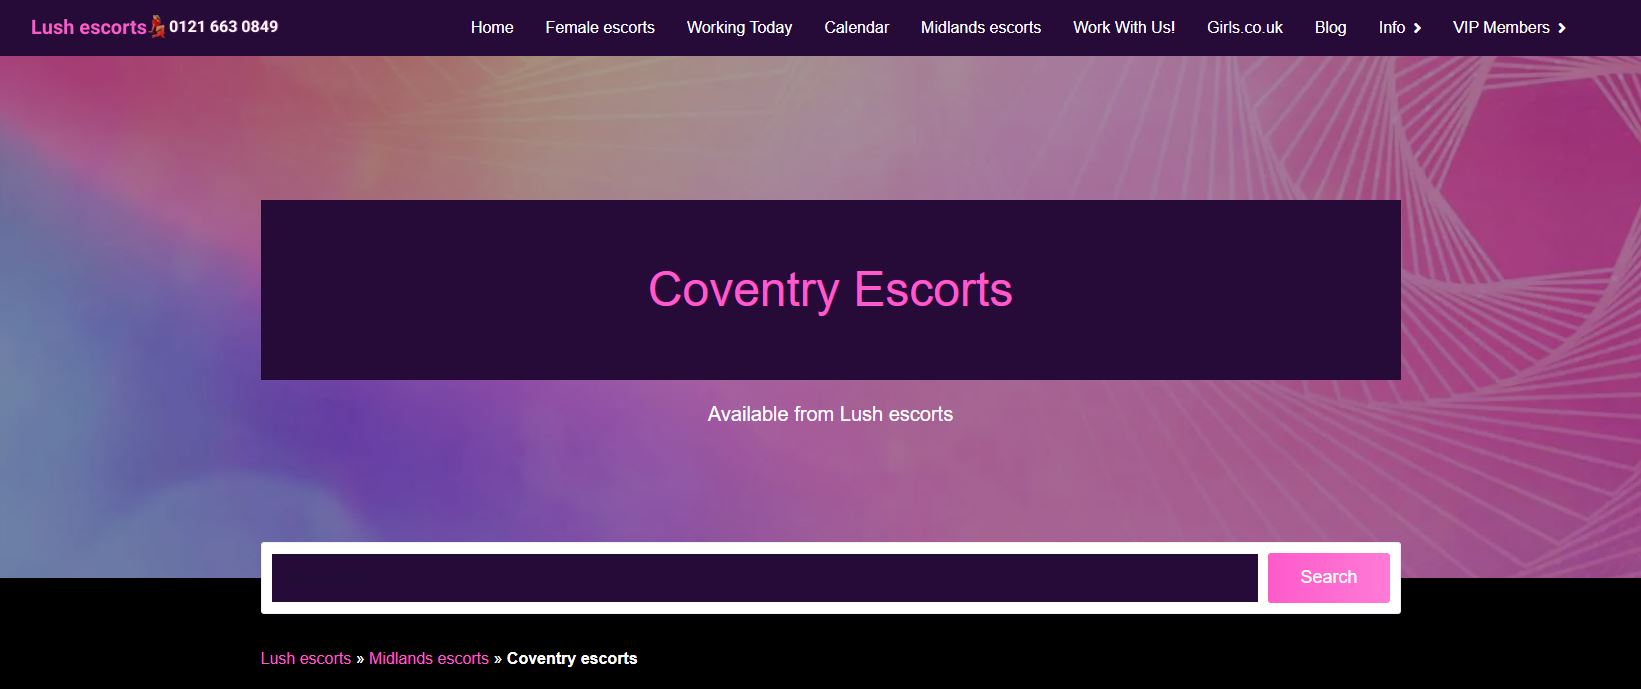 What are some of the things, you can expect when booking an escort through an agency in Conventry.